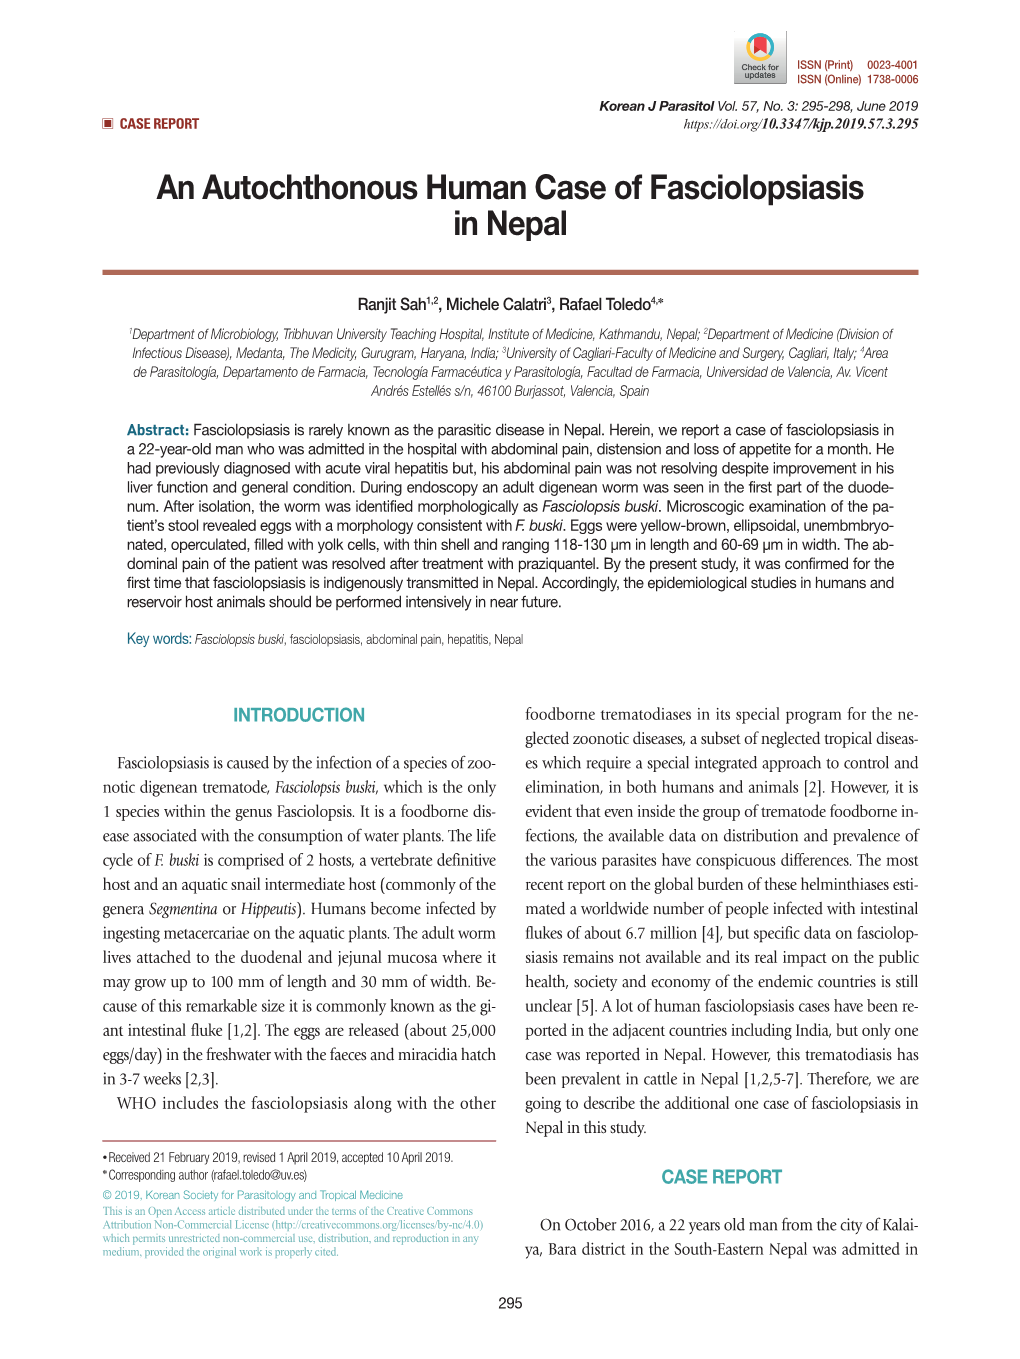 An Autochthonous Human Case of Fasciolopsiasis in Nepal